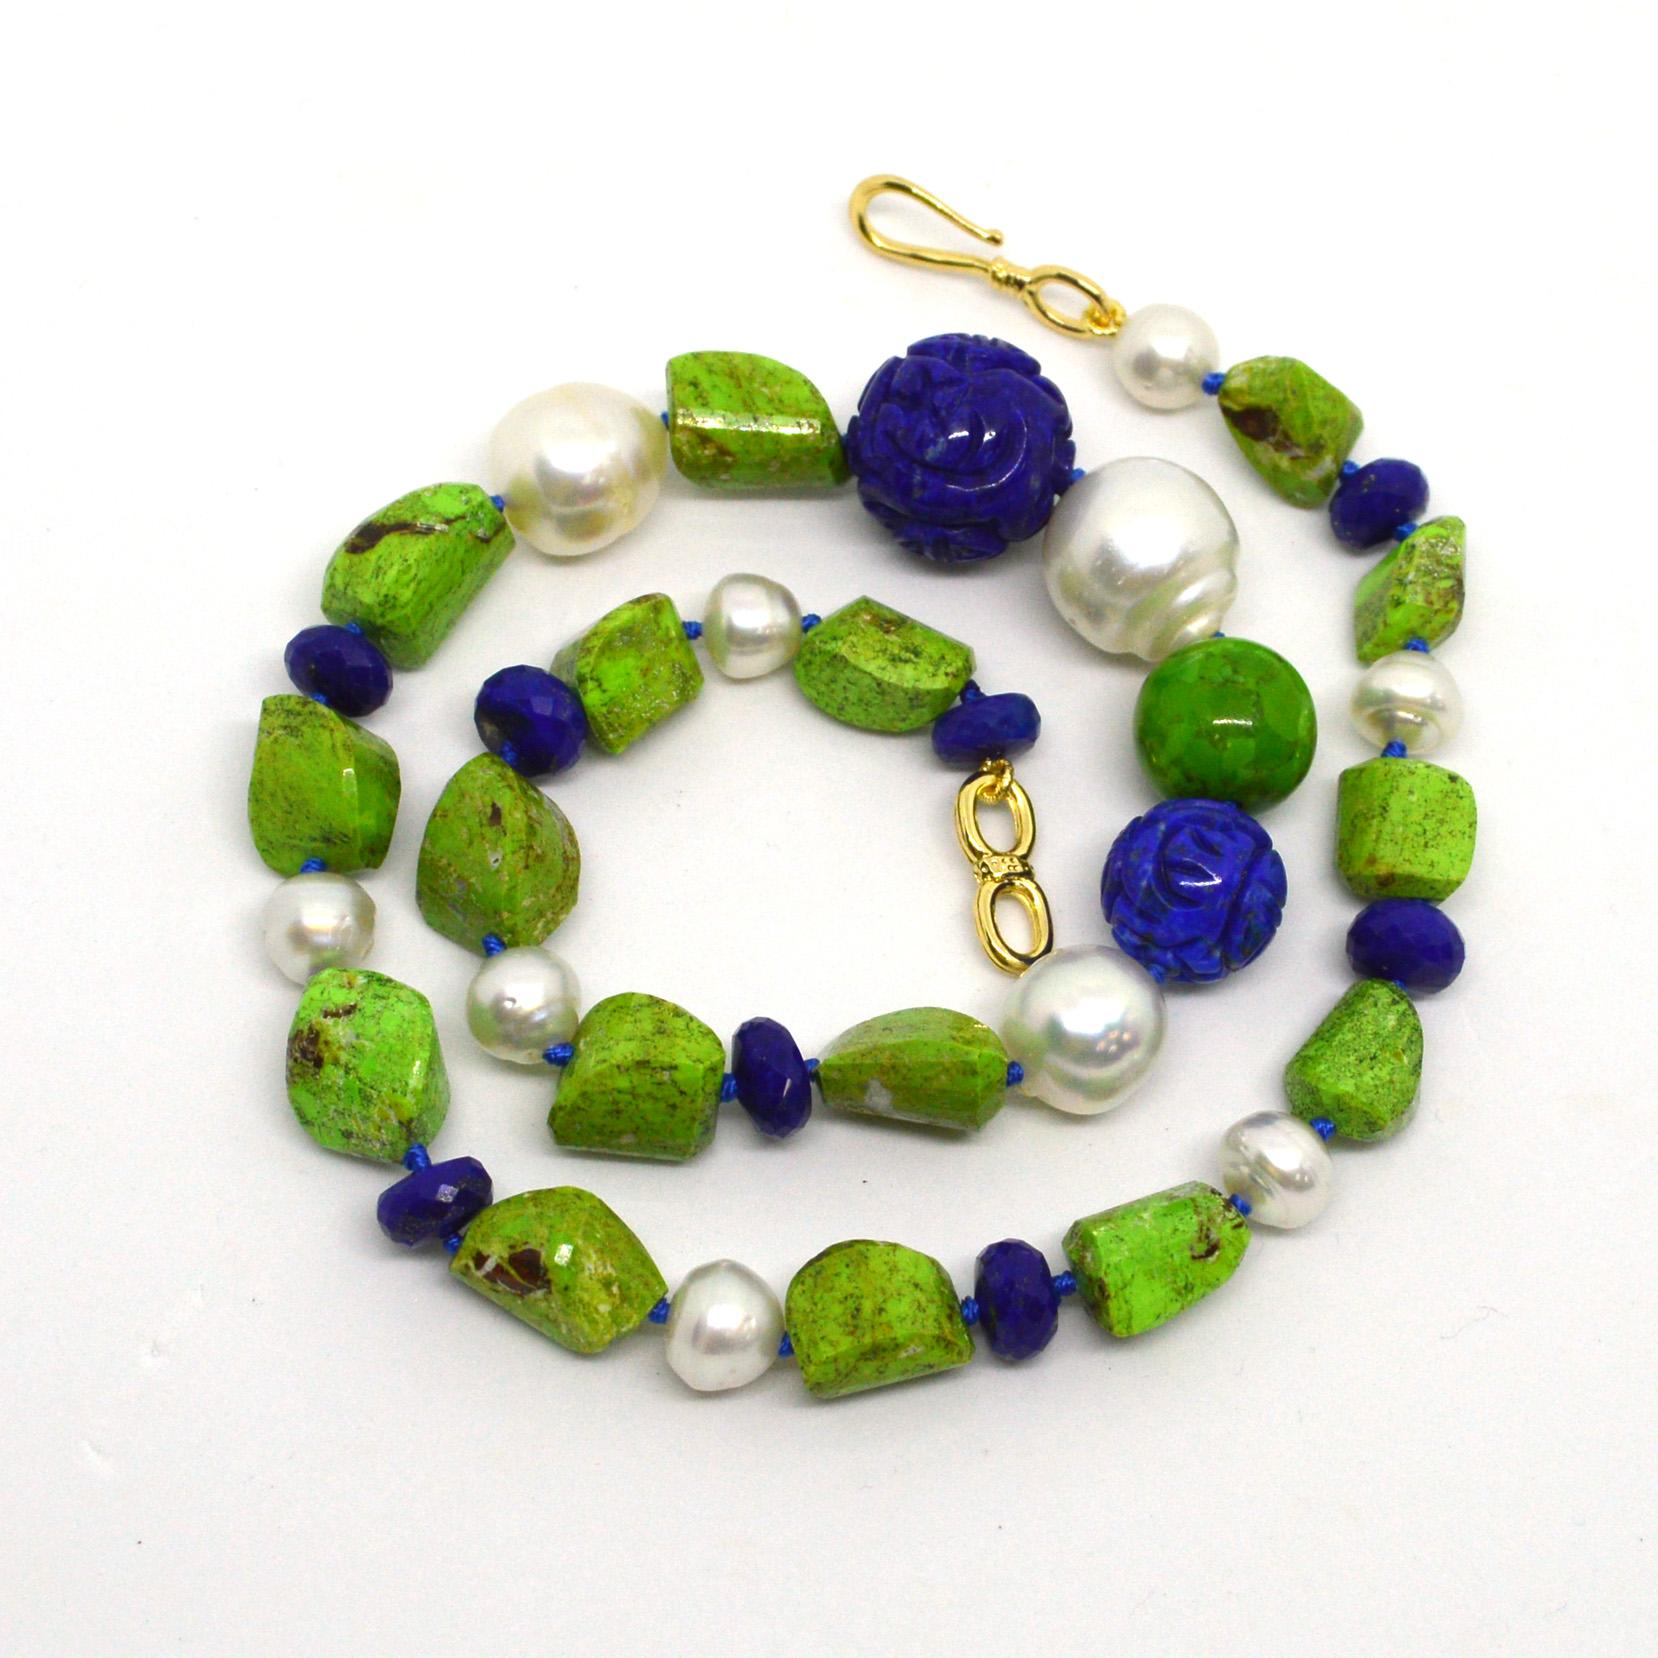 A Gorgeous pattern of Gaspeite, Australian South Sea Pearl and Lapis Lazuli beads with a feature of carved Lapis Lazuli beads. ( Largest lapis 18mm  largest south sea pearl 16mm ). Hand knotted on blue thread with a 14k gold filled hook clasp.
Total